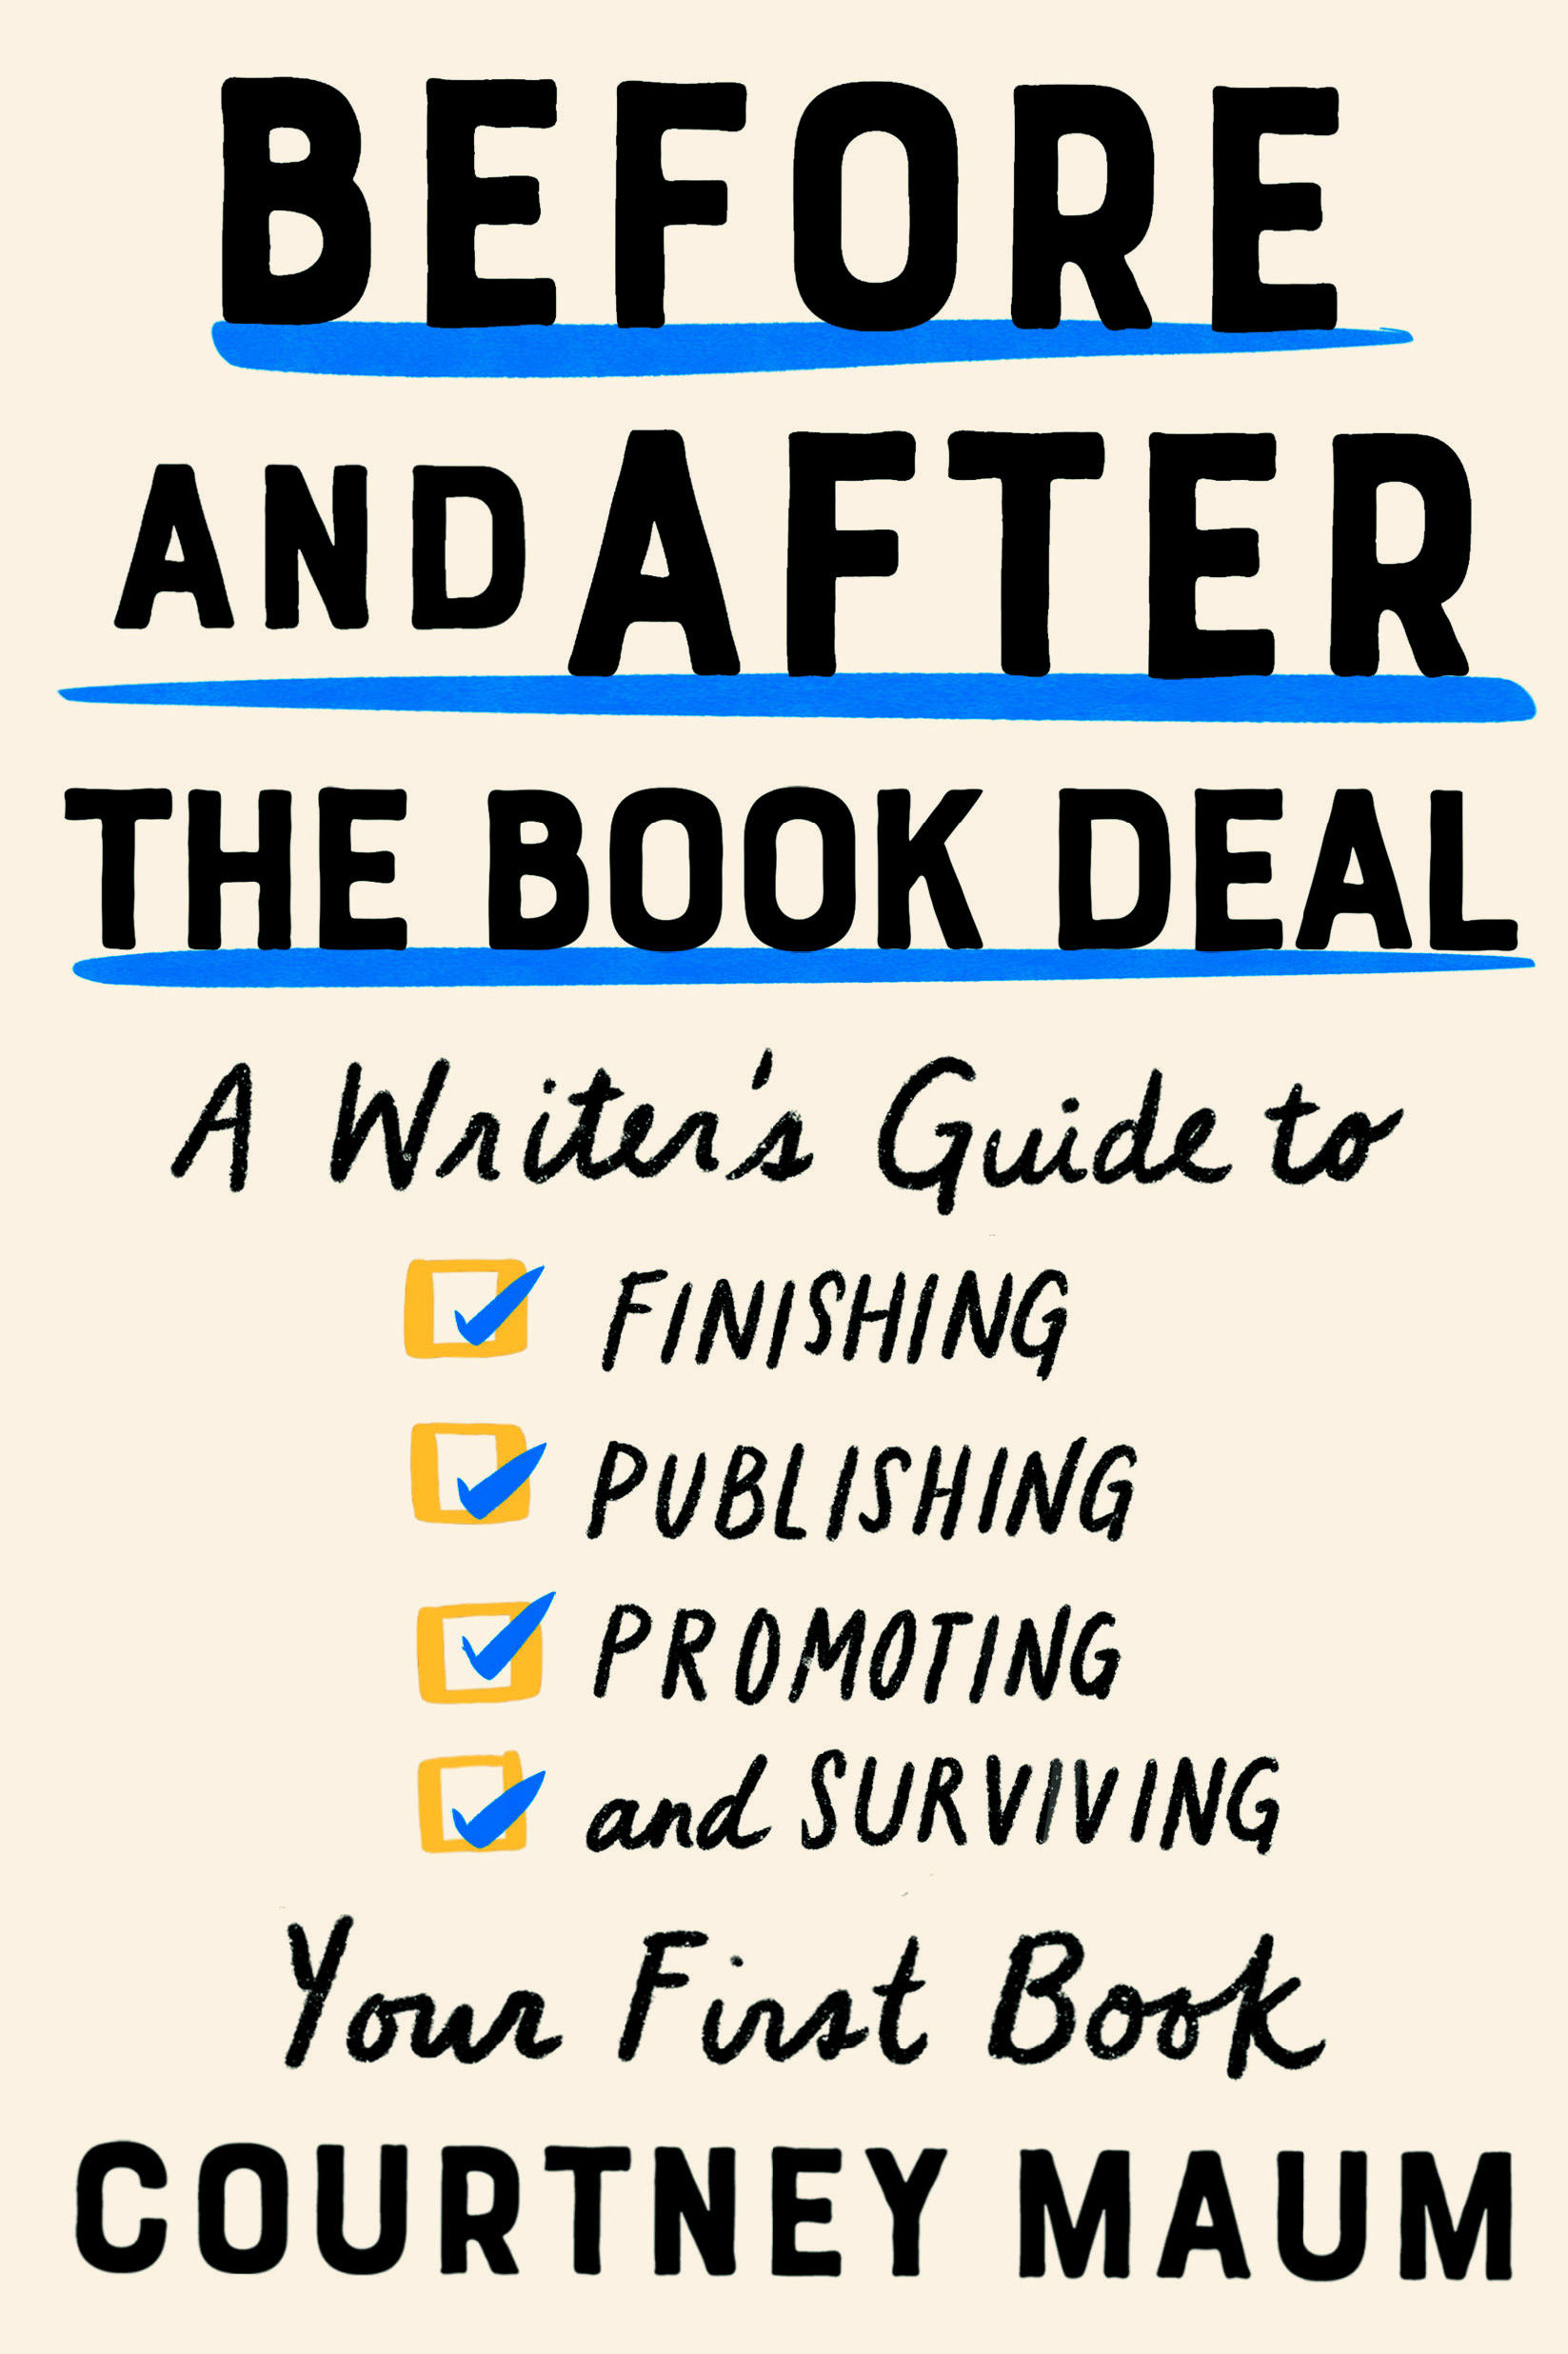 Book Launch: Before and After the Book Deal by Courtney Maum with Catapult, One Story, Fletcher & Co, and co-panelists: Monica Odom, Jenn Baker and more!